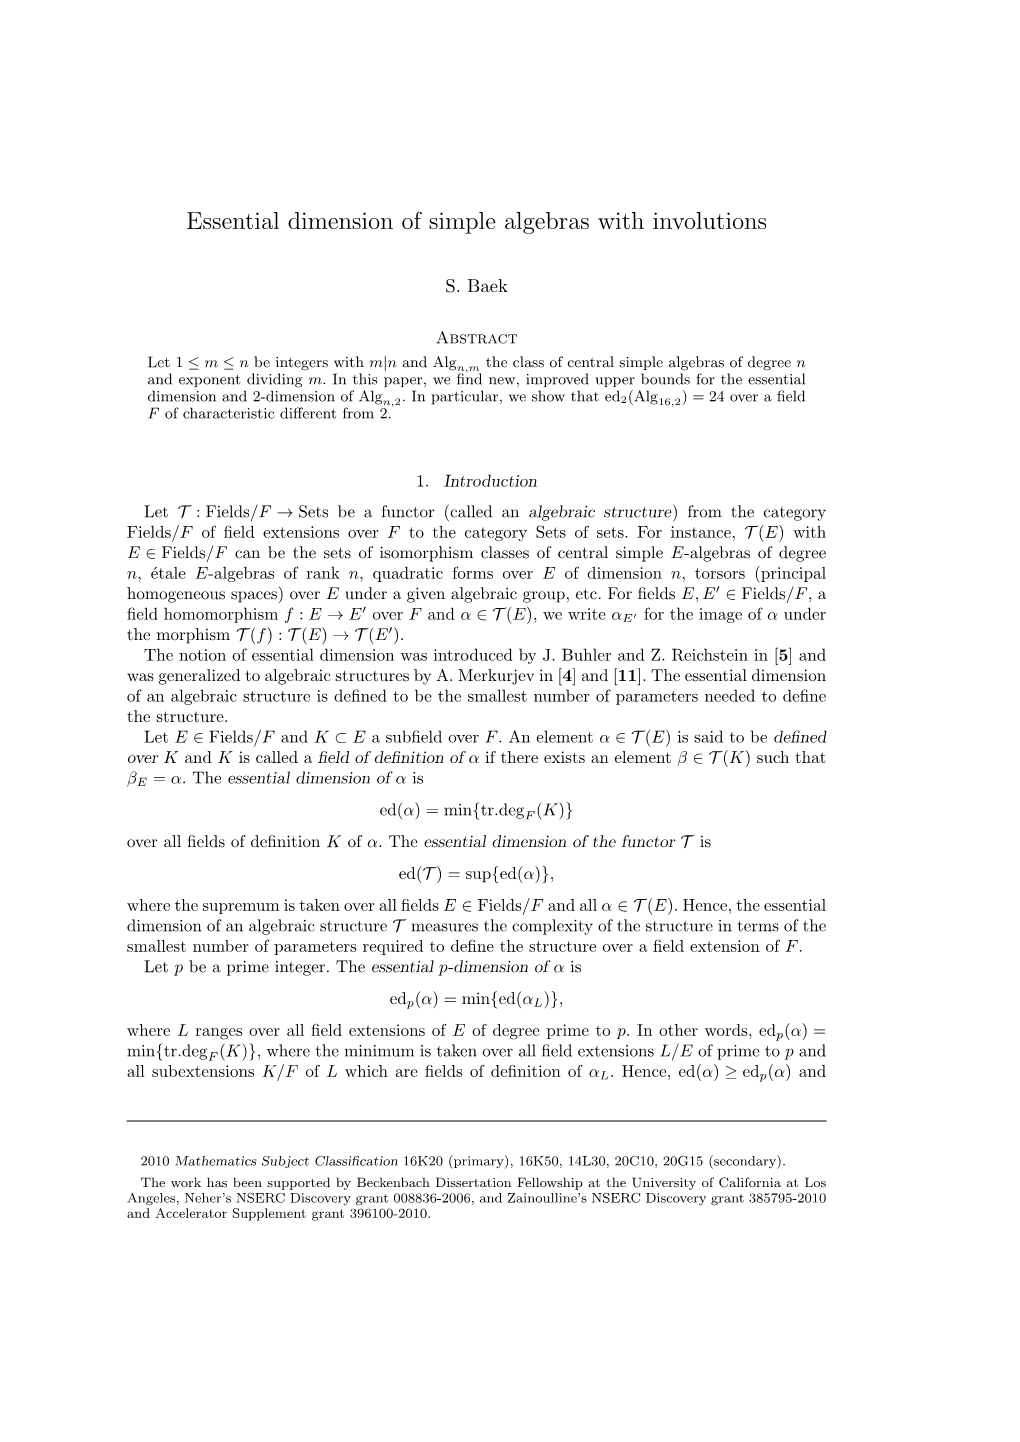 Essential Dimension of Simple Algebras with Involutions